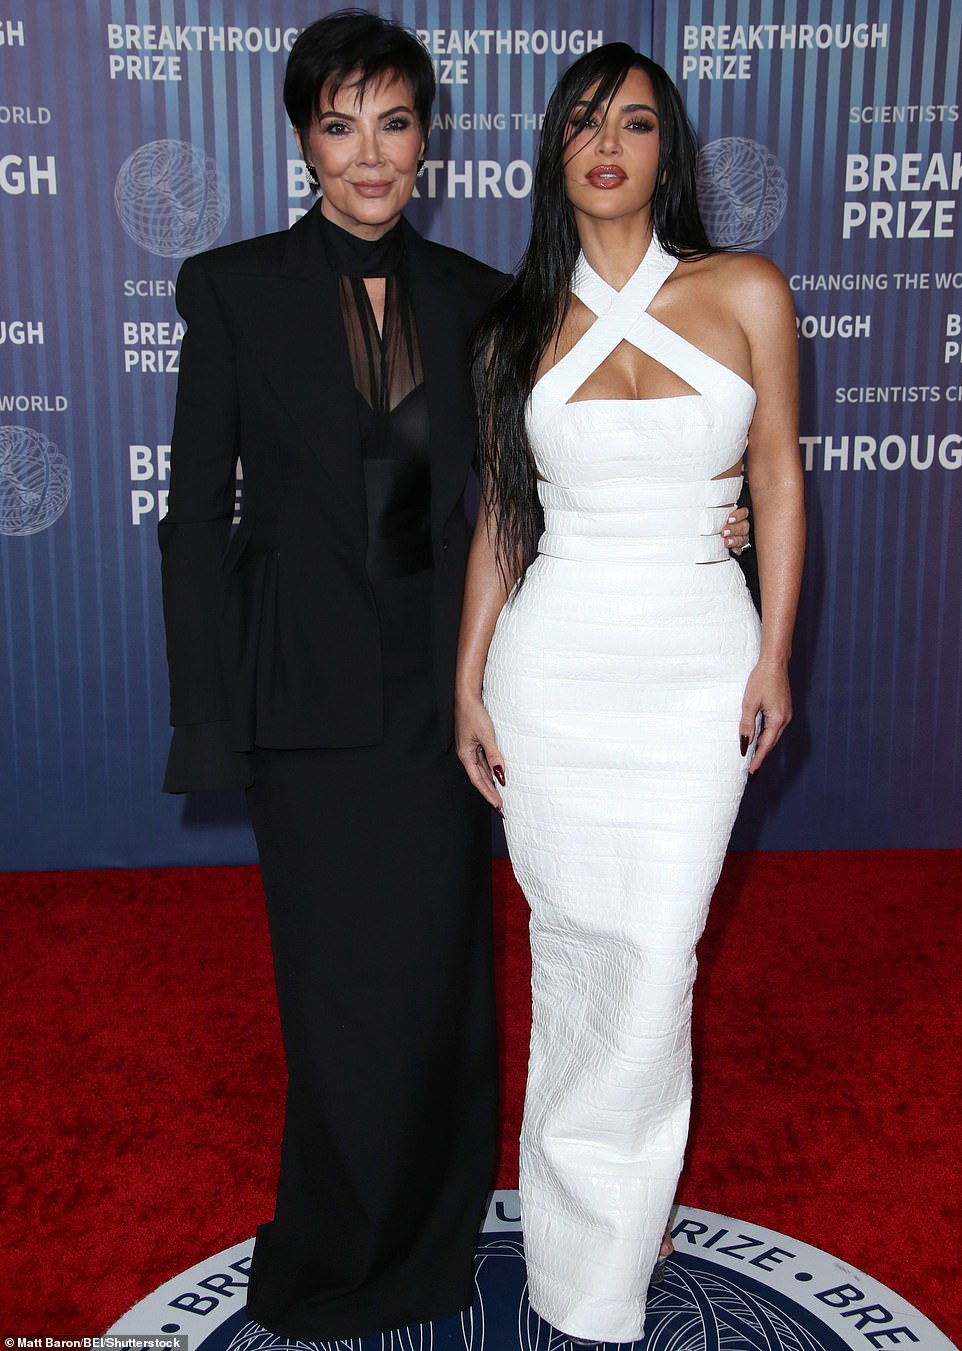 That night he arrived on the red carpet arm in arm with his black-clad mother, Kris Jenner, who made the phrase 'momager' famous in her role as matriarch of the Kardashian-Jenner clan.